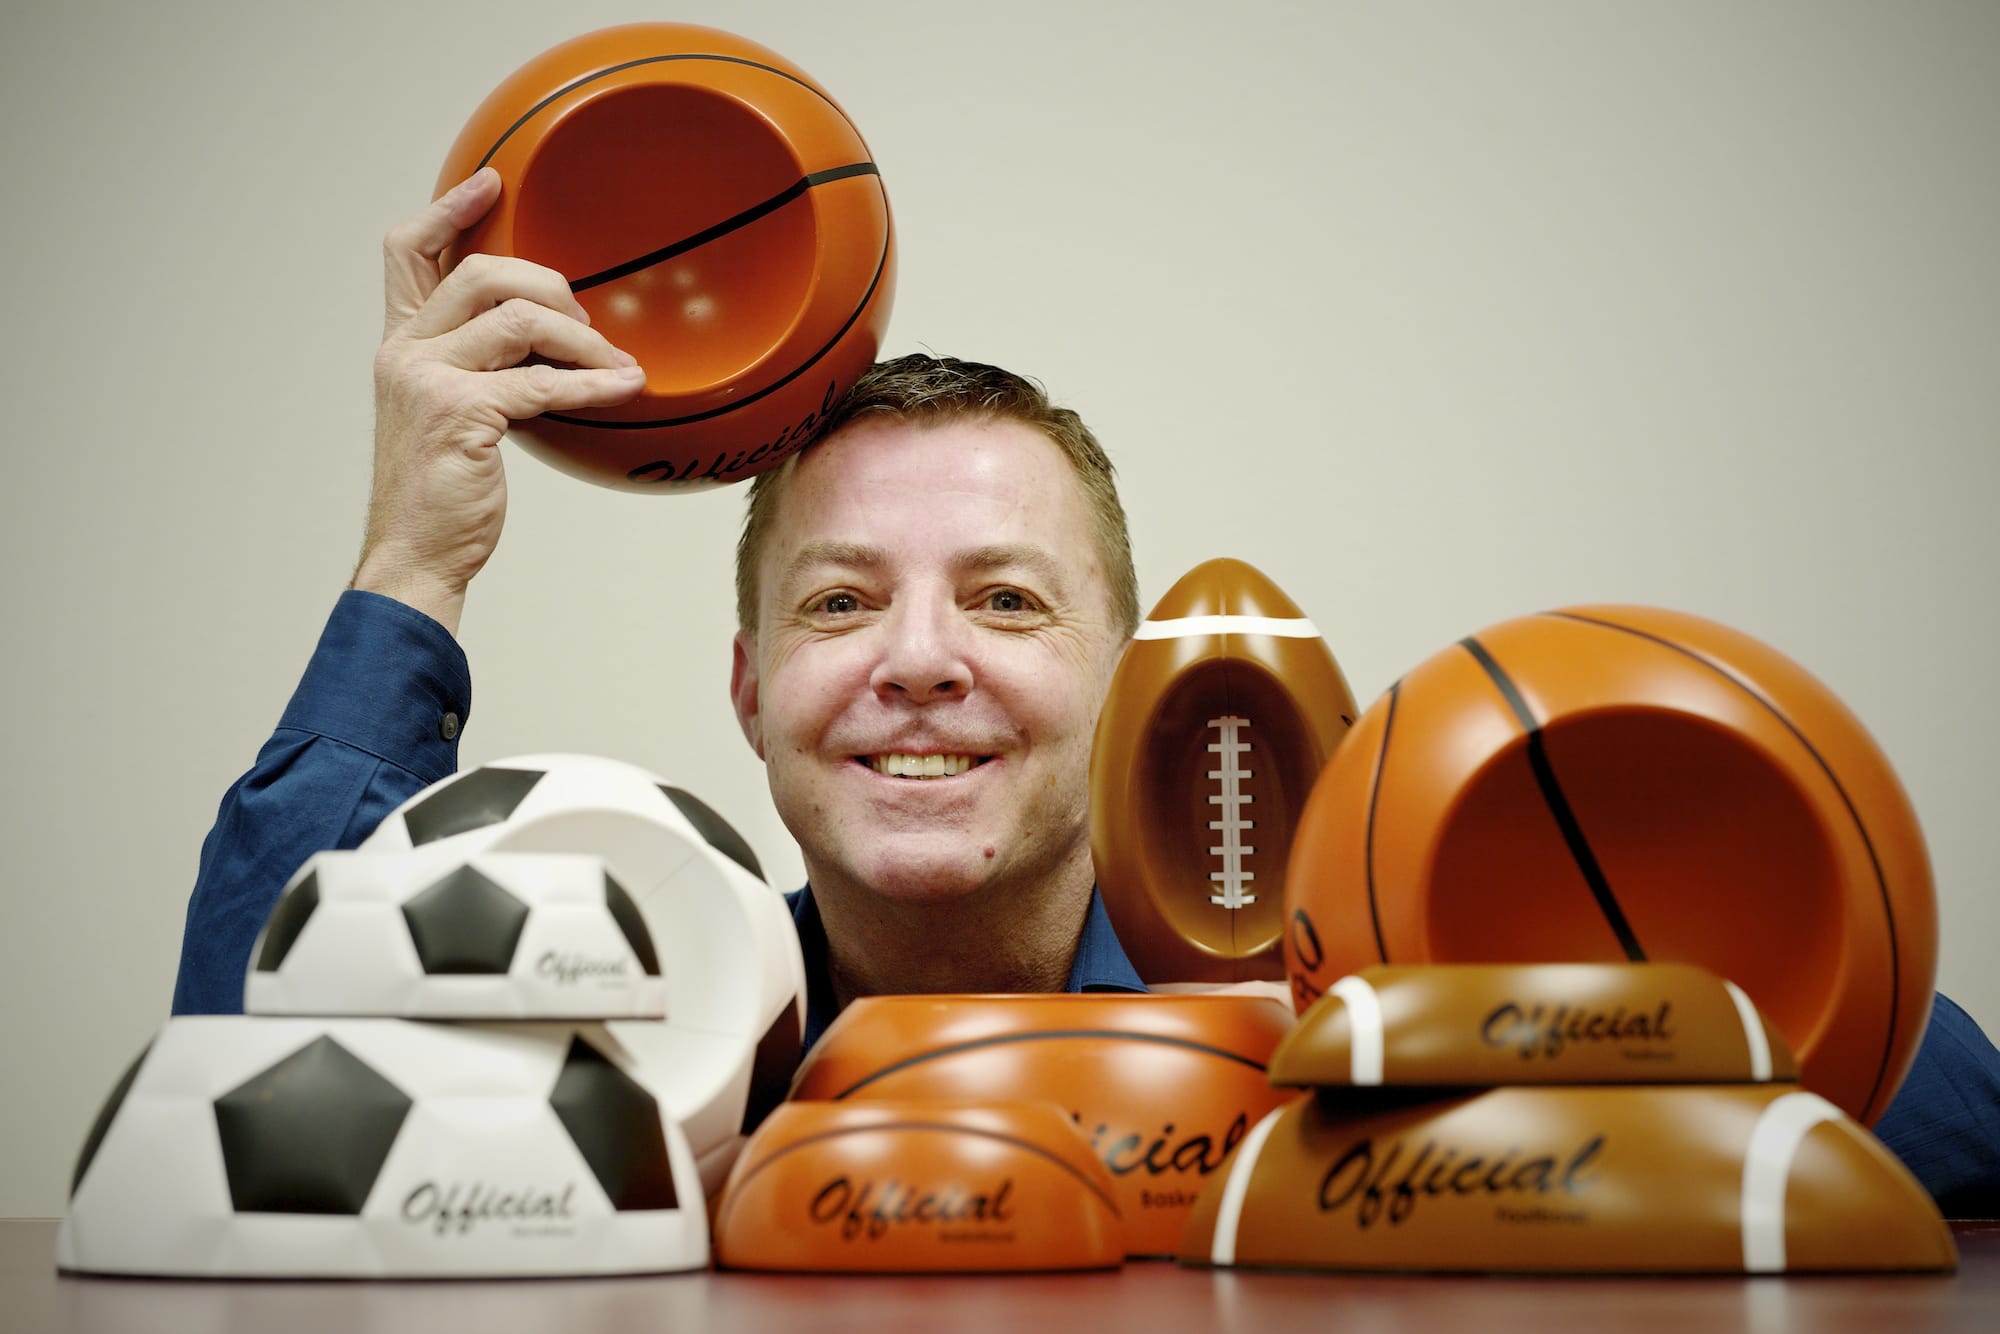 John Wirth, president and CEO of Remarkabowl, shows off some of his products at his company headquarters.